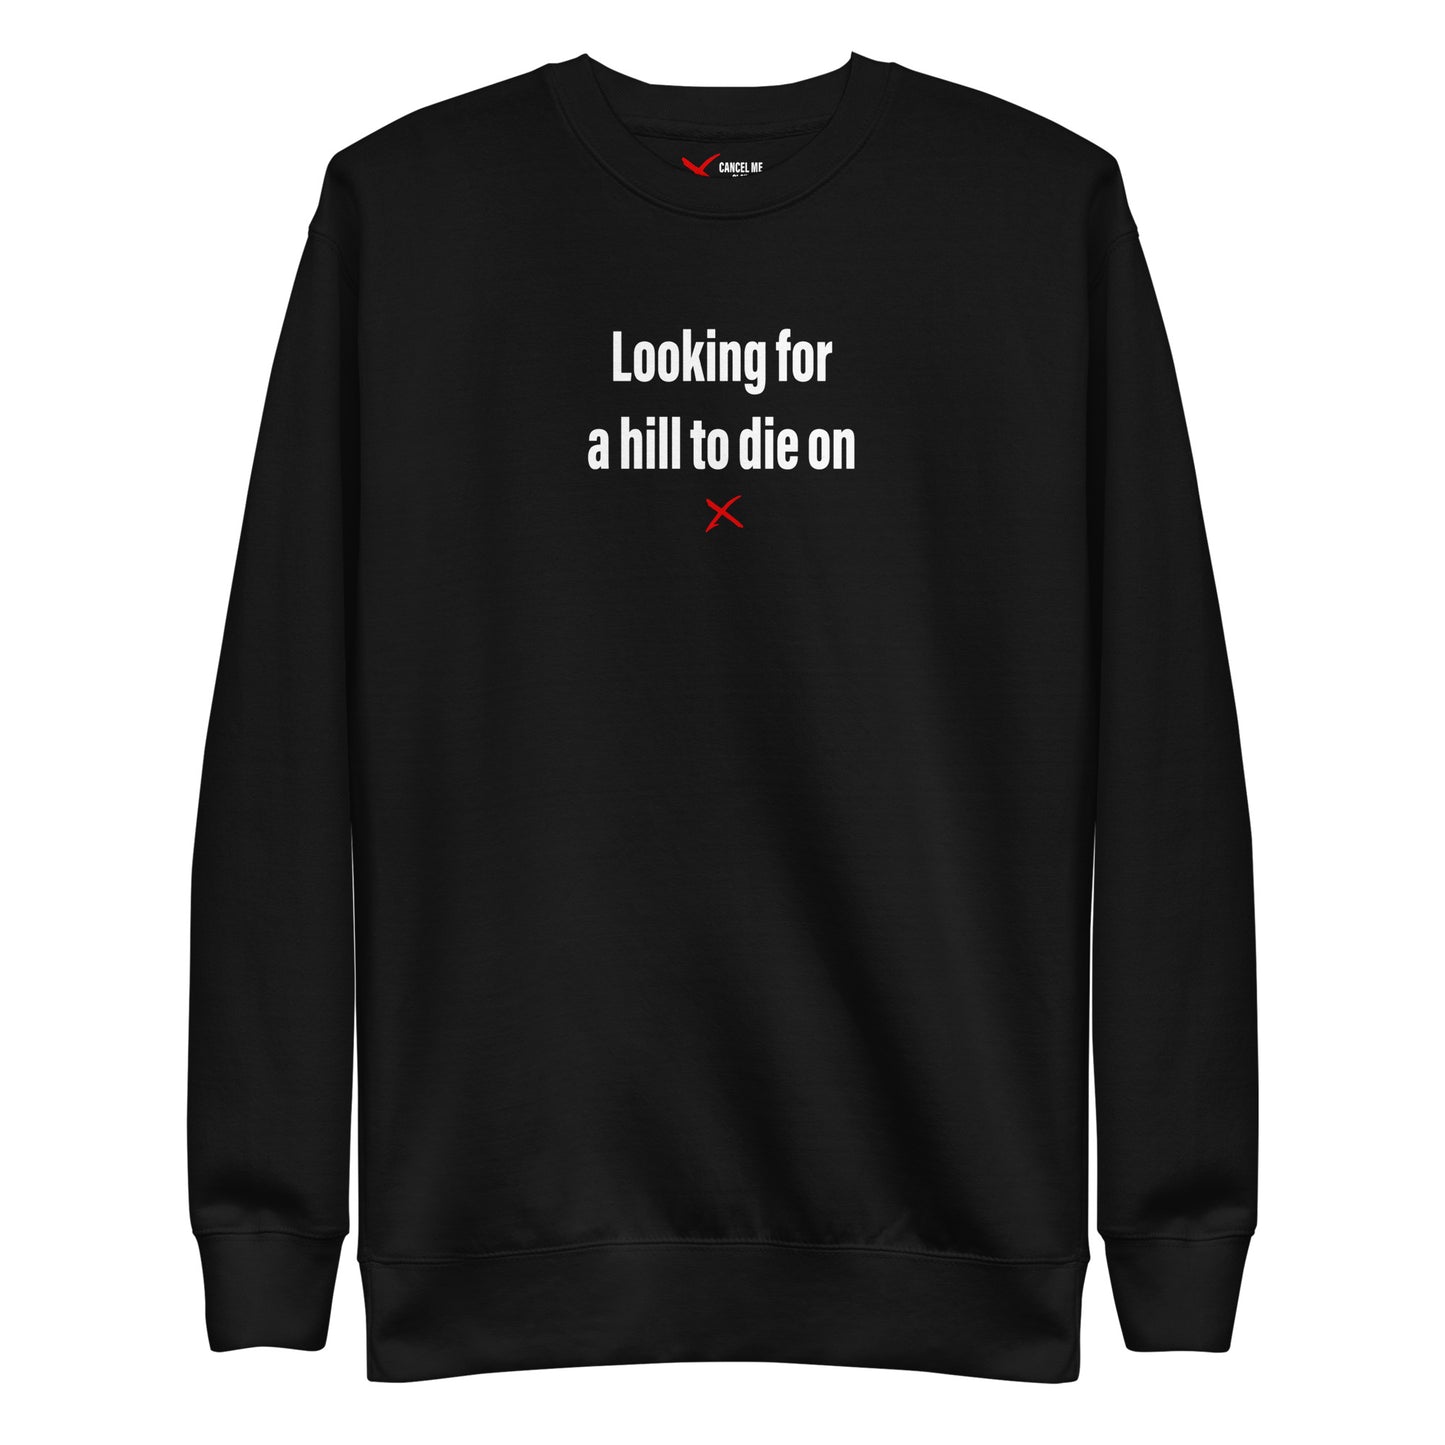 Looking for a hill to die on - Sweatshirt